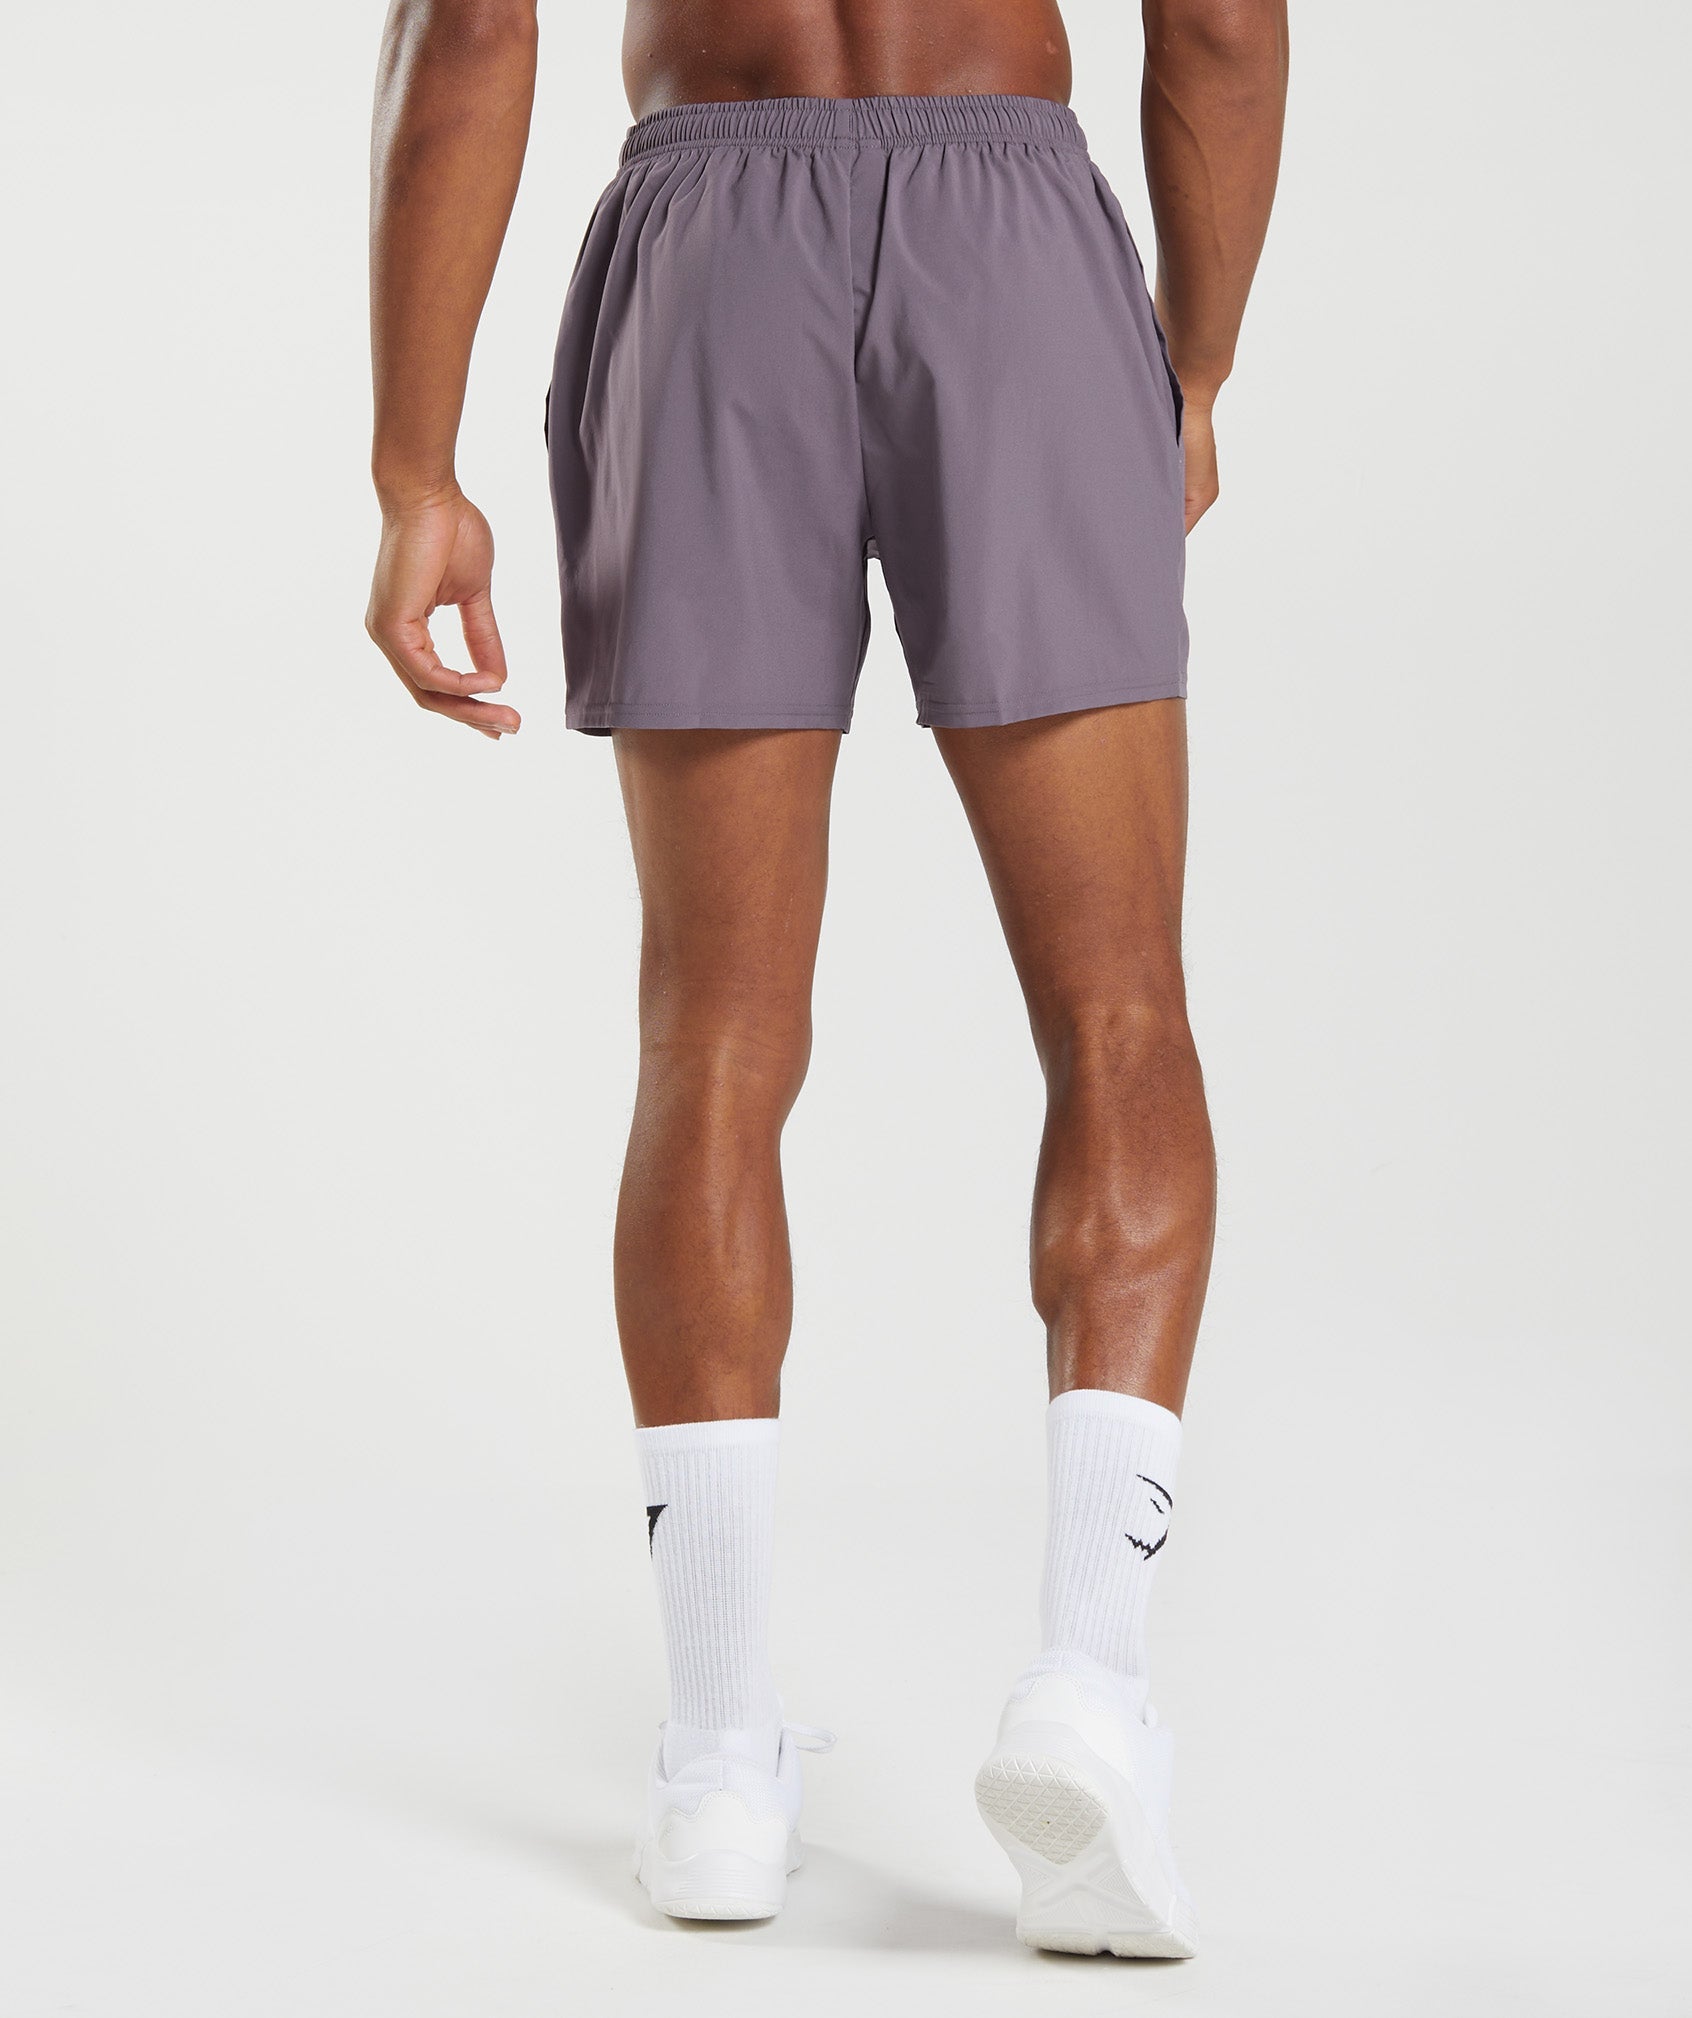 Arrival 5" Shorts in Musk Lilac - view 2